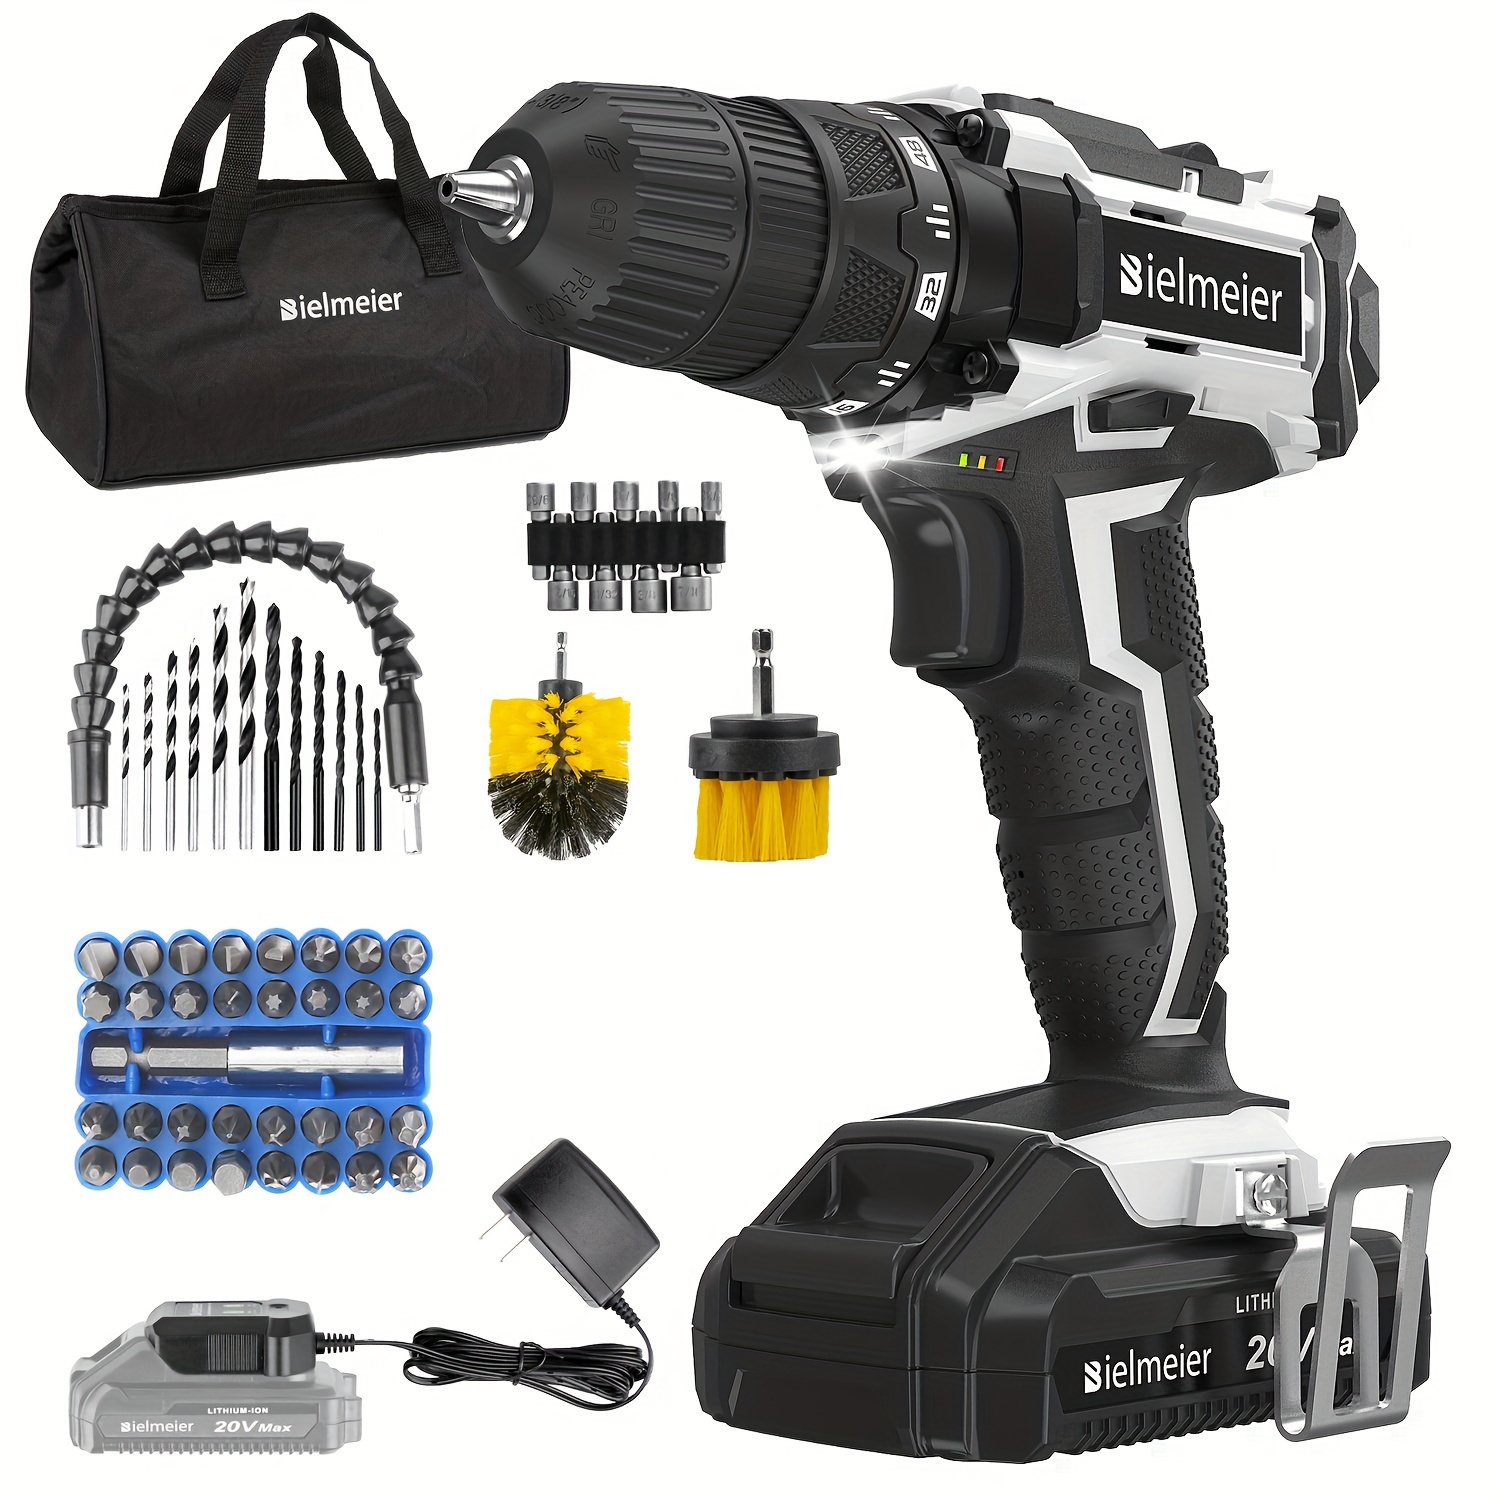 

20v Max Cordless Drill Set, 285 In-lb Torque, 2 Variable Speed, 64+1 Position, 3/8" Keyless Chuck, Drill Machine Includes 2 Brushes, Flex Shaft, Cloth Bag & 58 Drill Bits